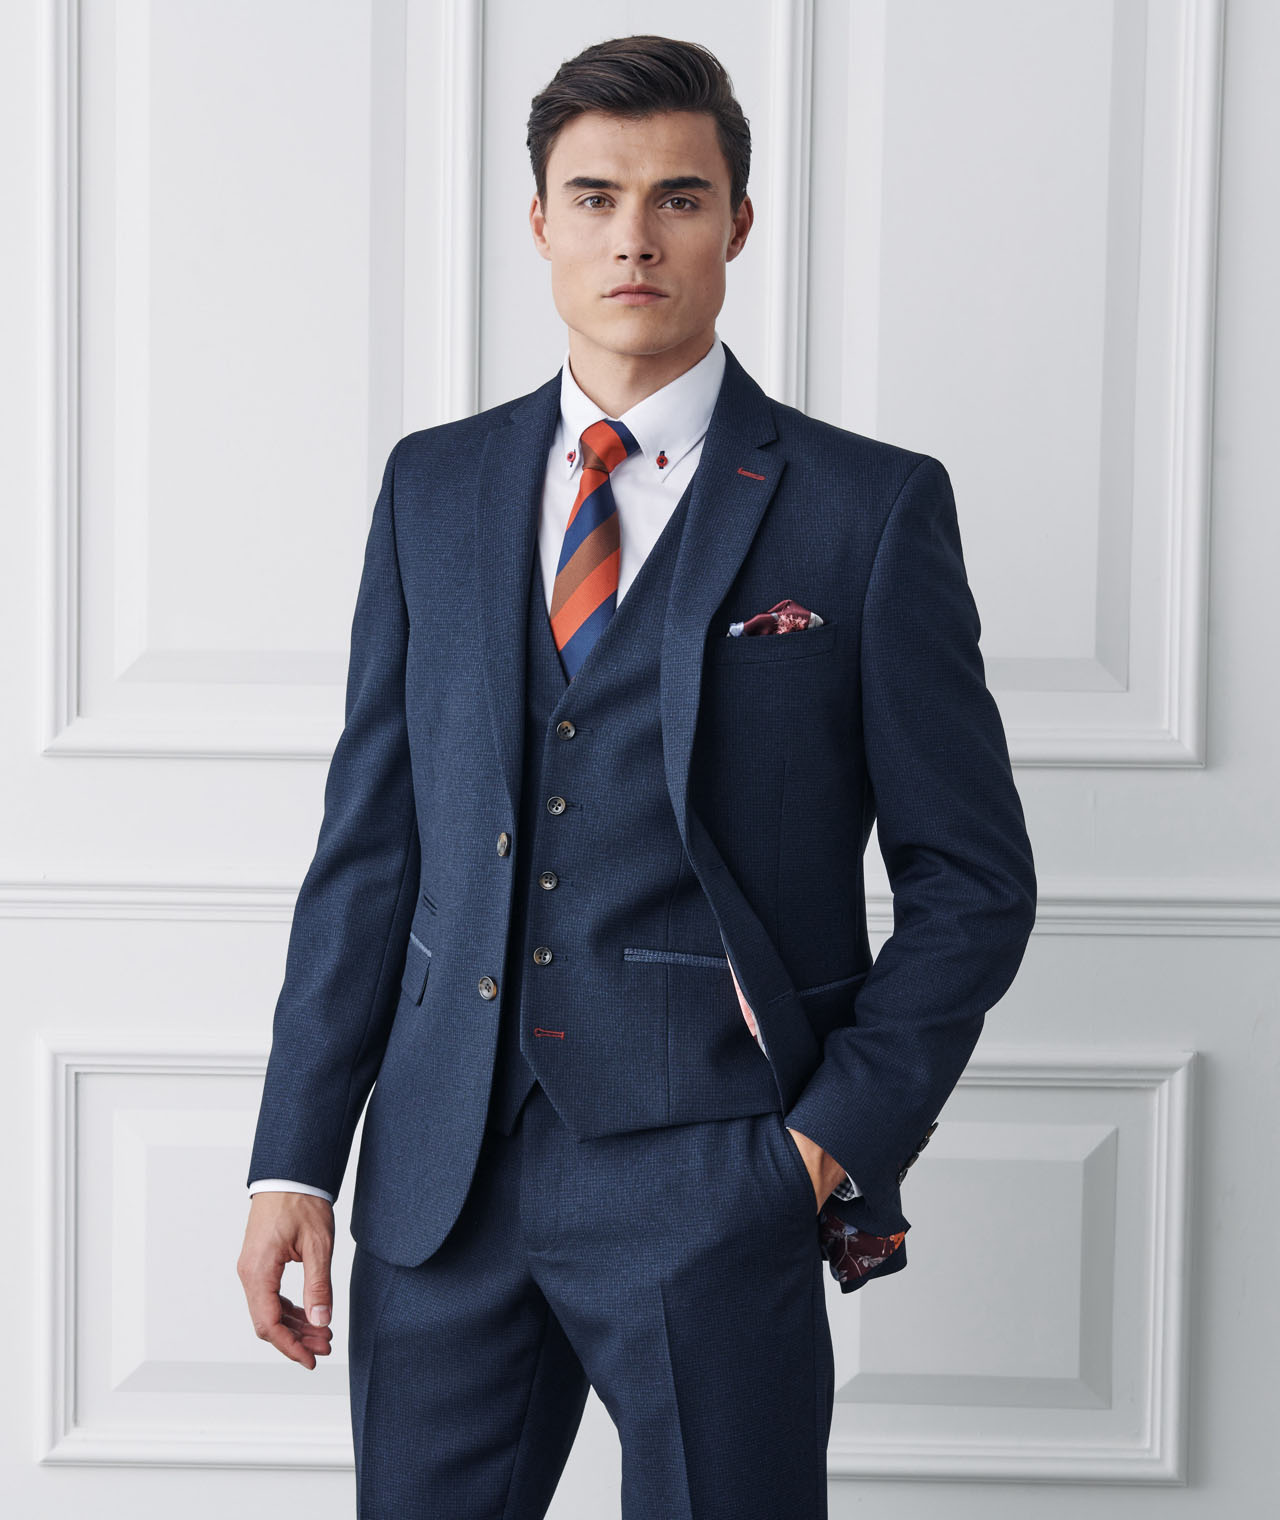 Men's Guide to Suits | Tailoring Tips | Next UK